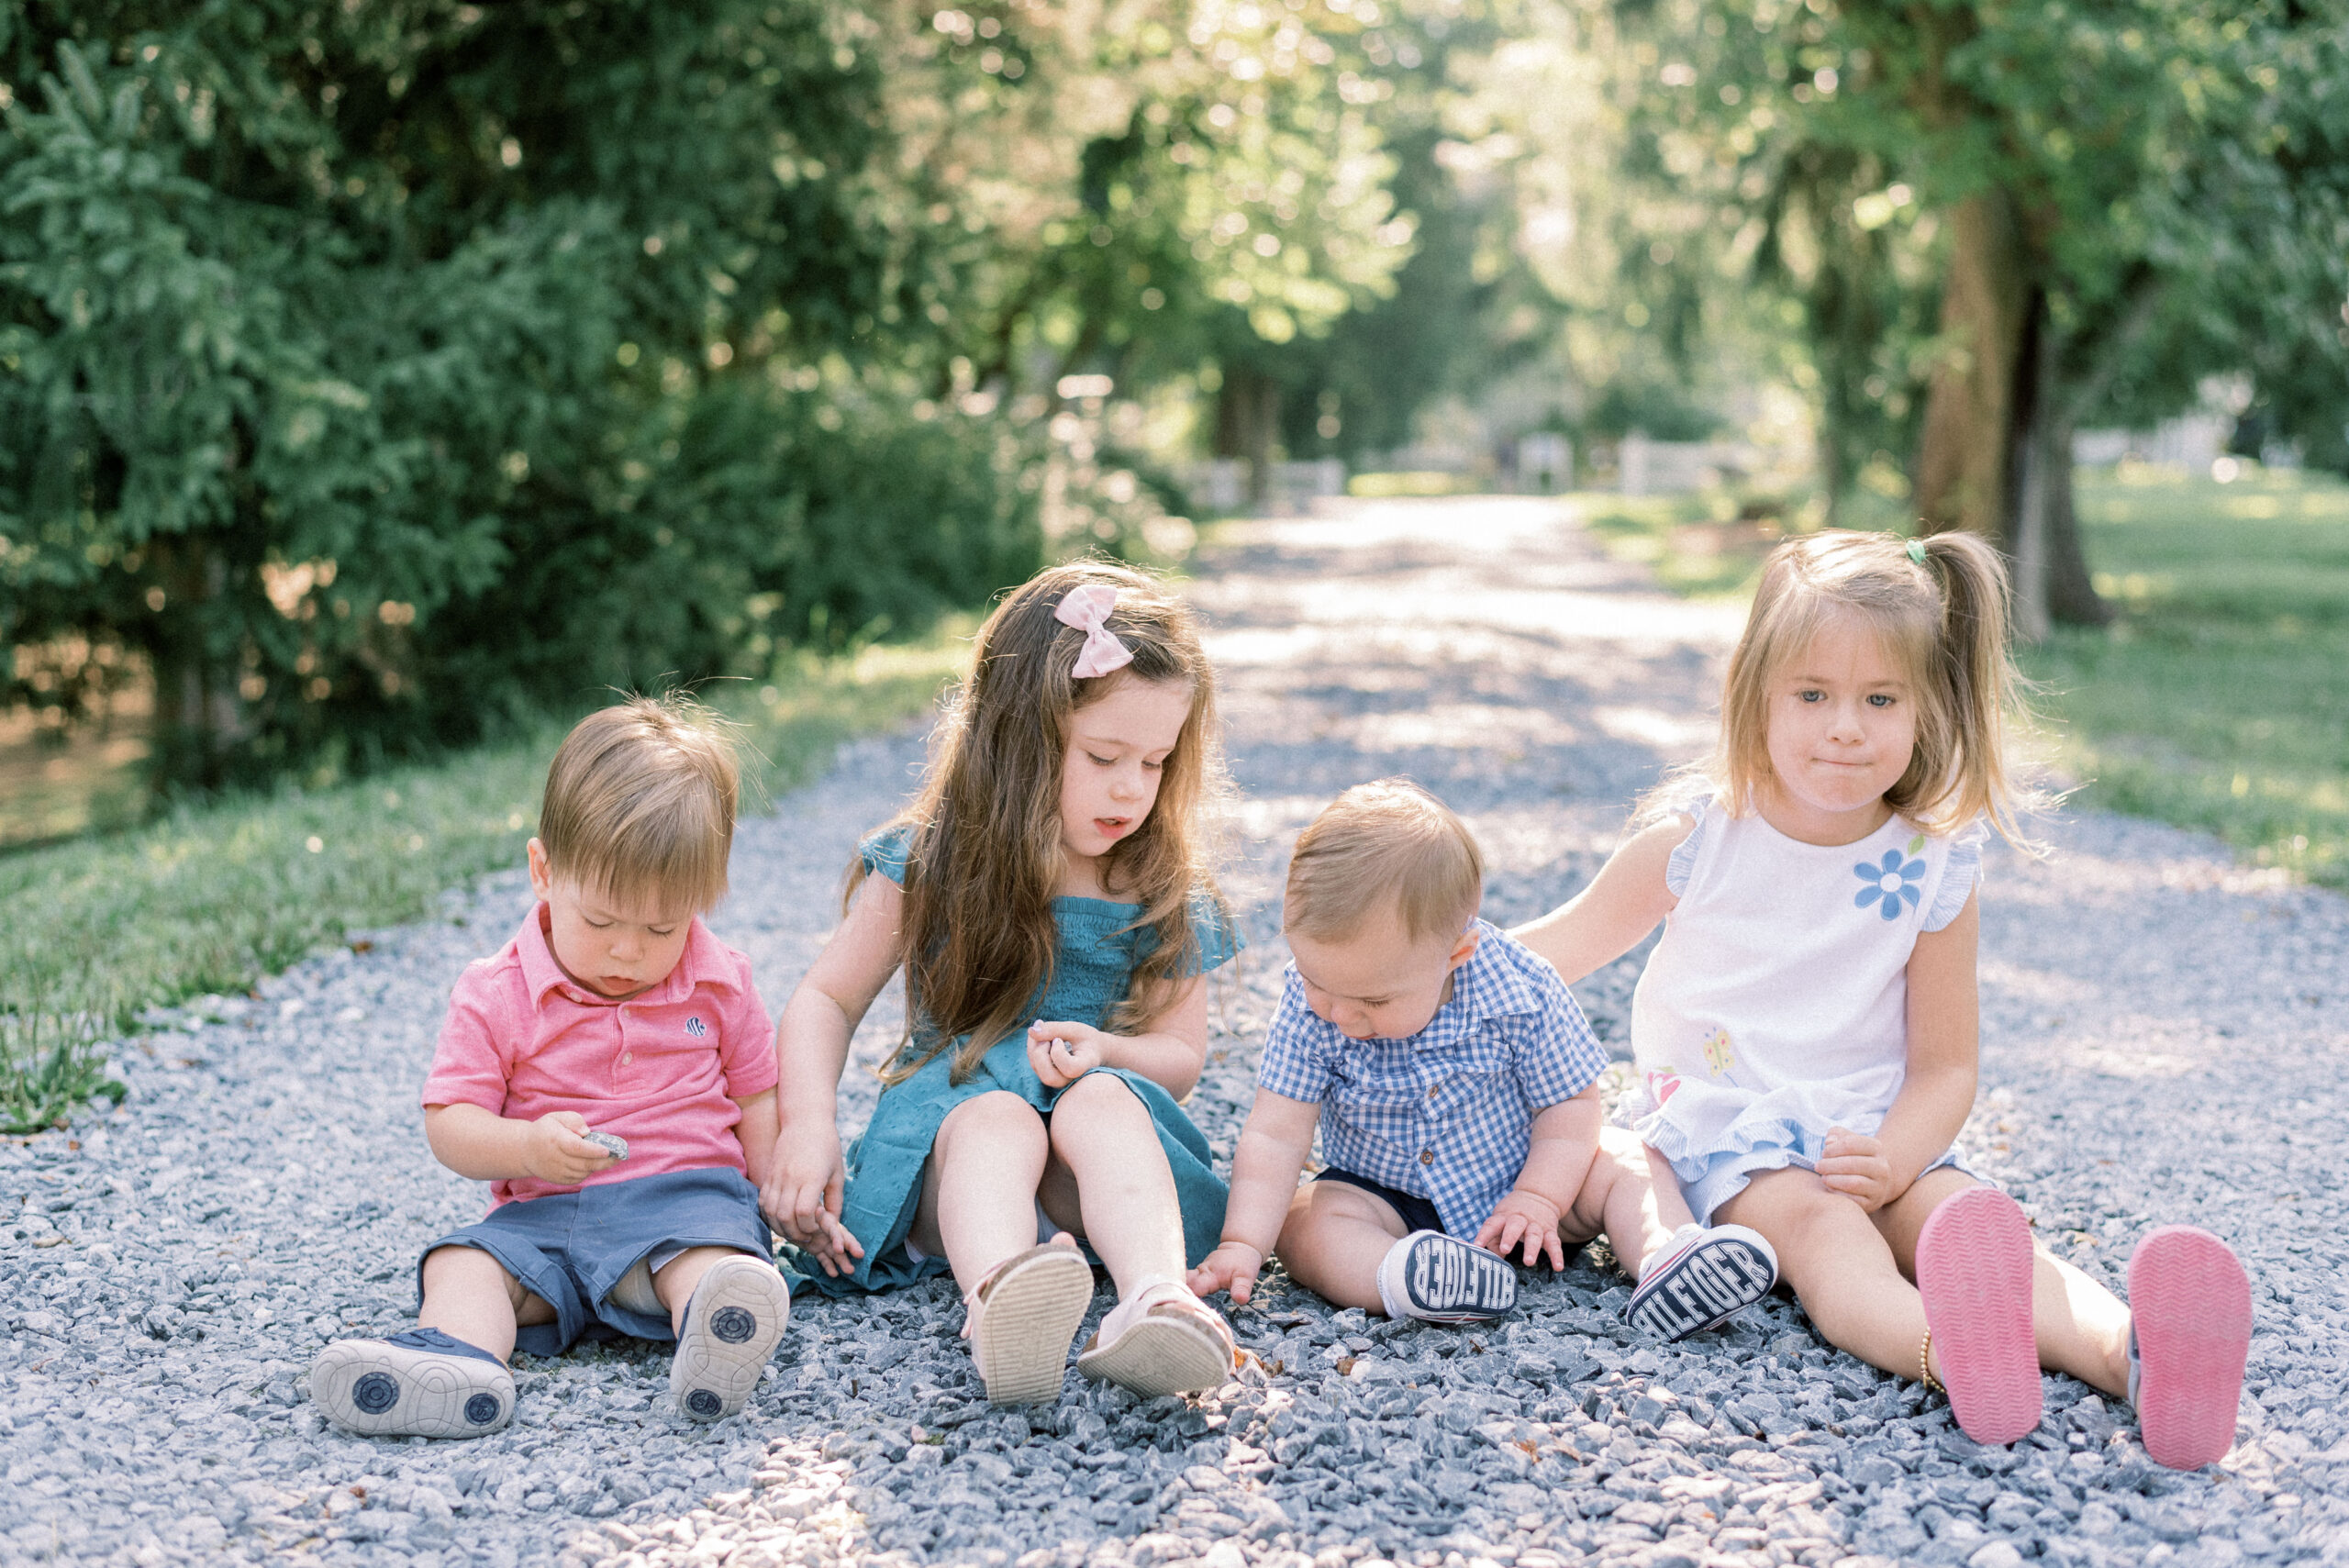 Maryland photographer captures kids sitting on ground together playing